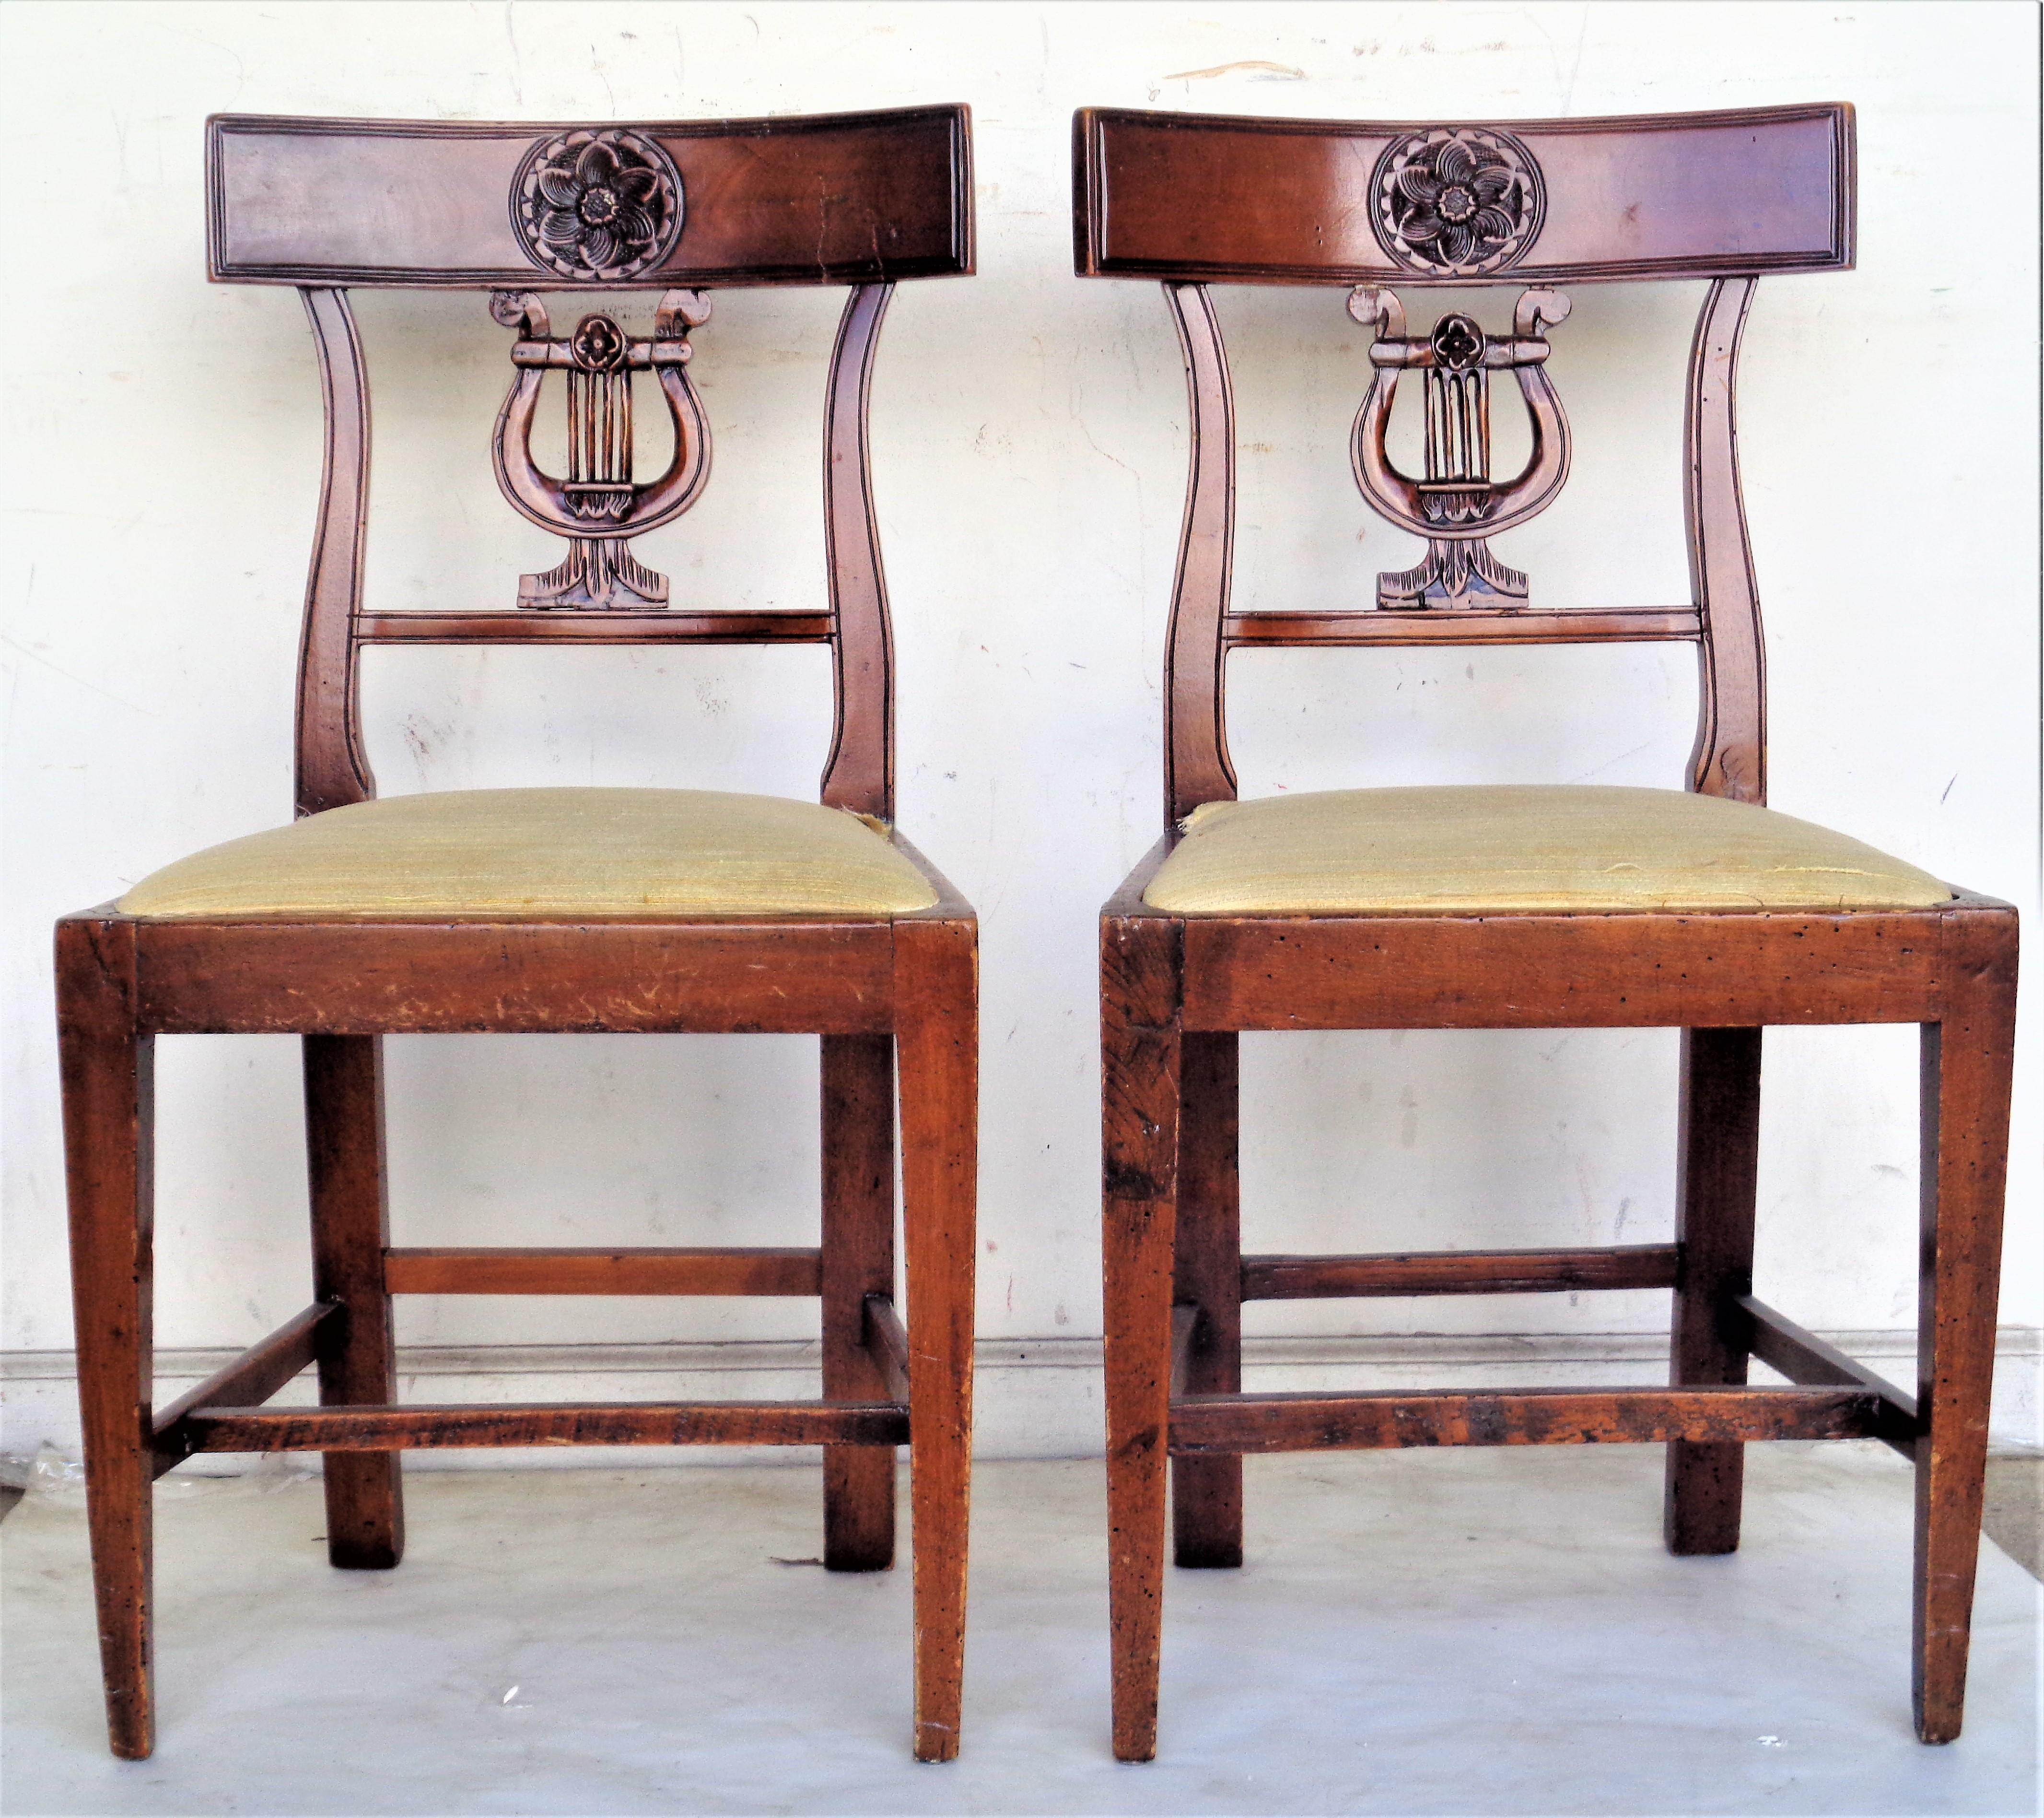 Pair of antique Italian Neoclassical hand carved lyre back side chairs with rosette carving at center of curved top back rails. Both chairs with early period construction and nicely aged rich color to wood. Date from the late 18th century - early